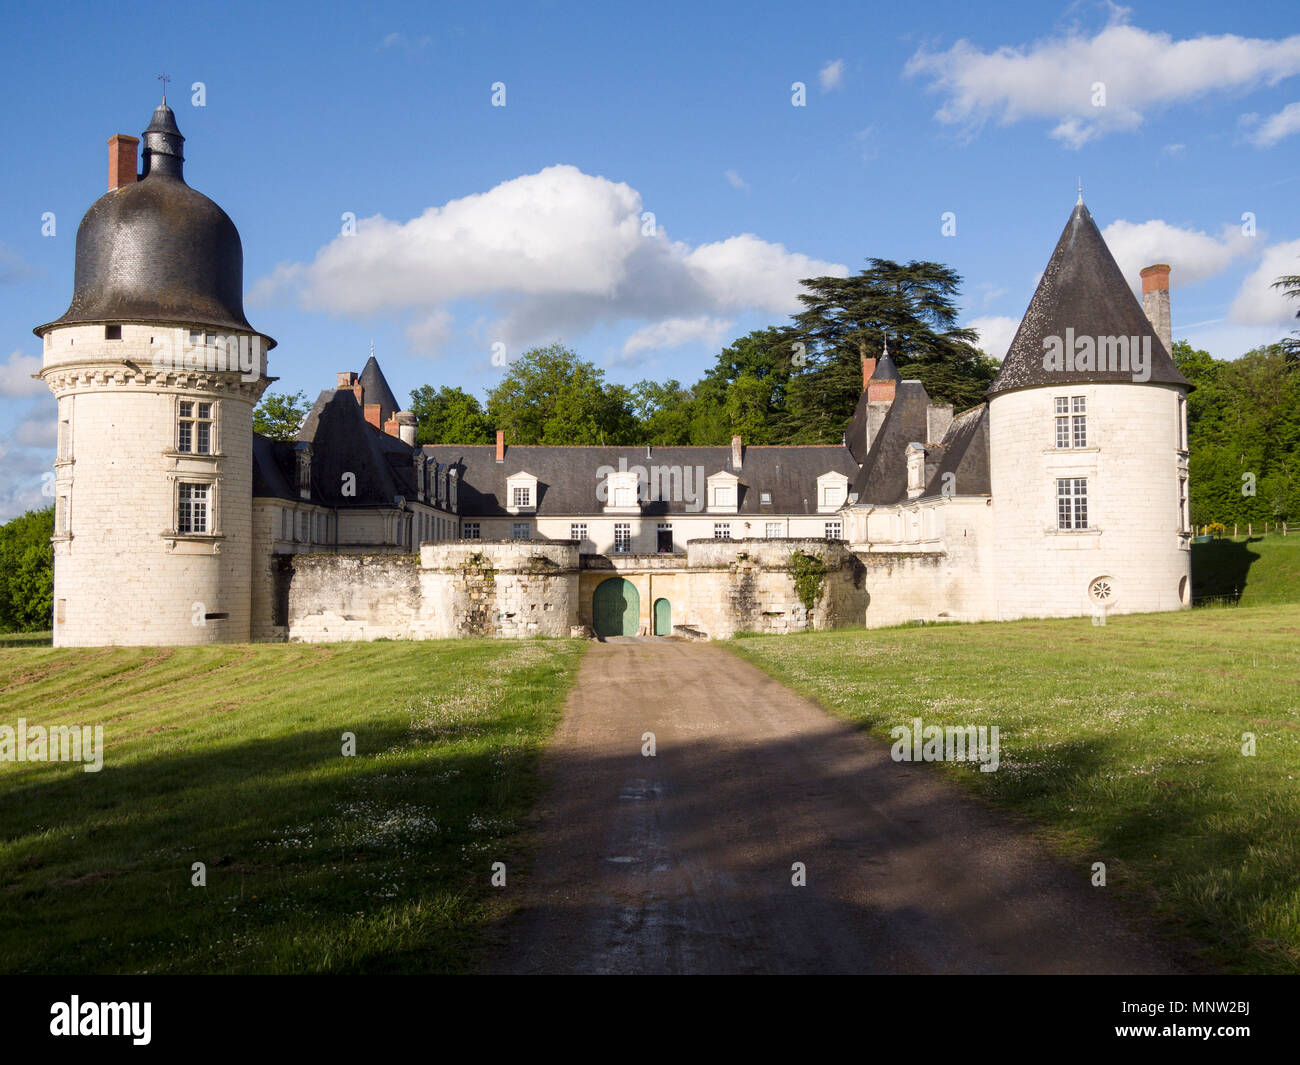 Driveway entrance to the Chateau du Gue-Pean: This well kept Chateau in the Loire region of France is surrounded by a thriving horse farm. Stock Photo